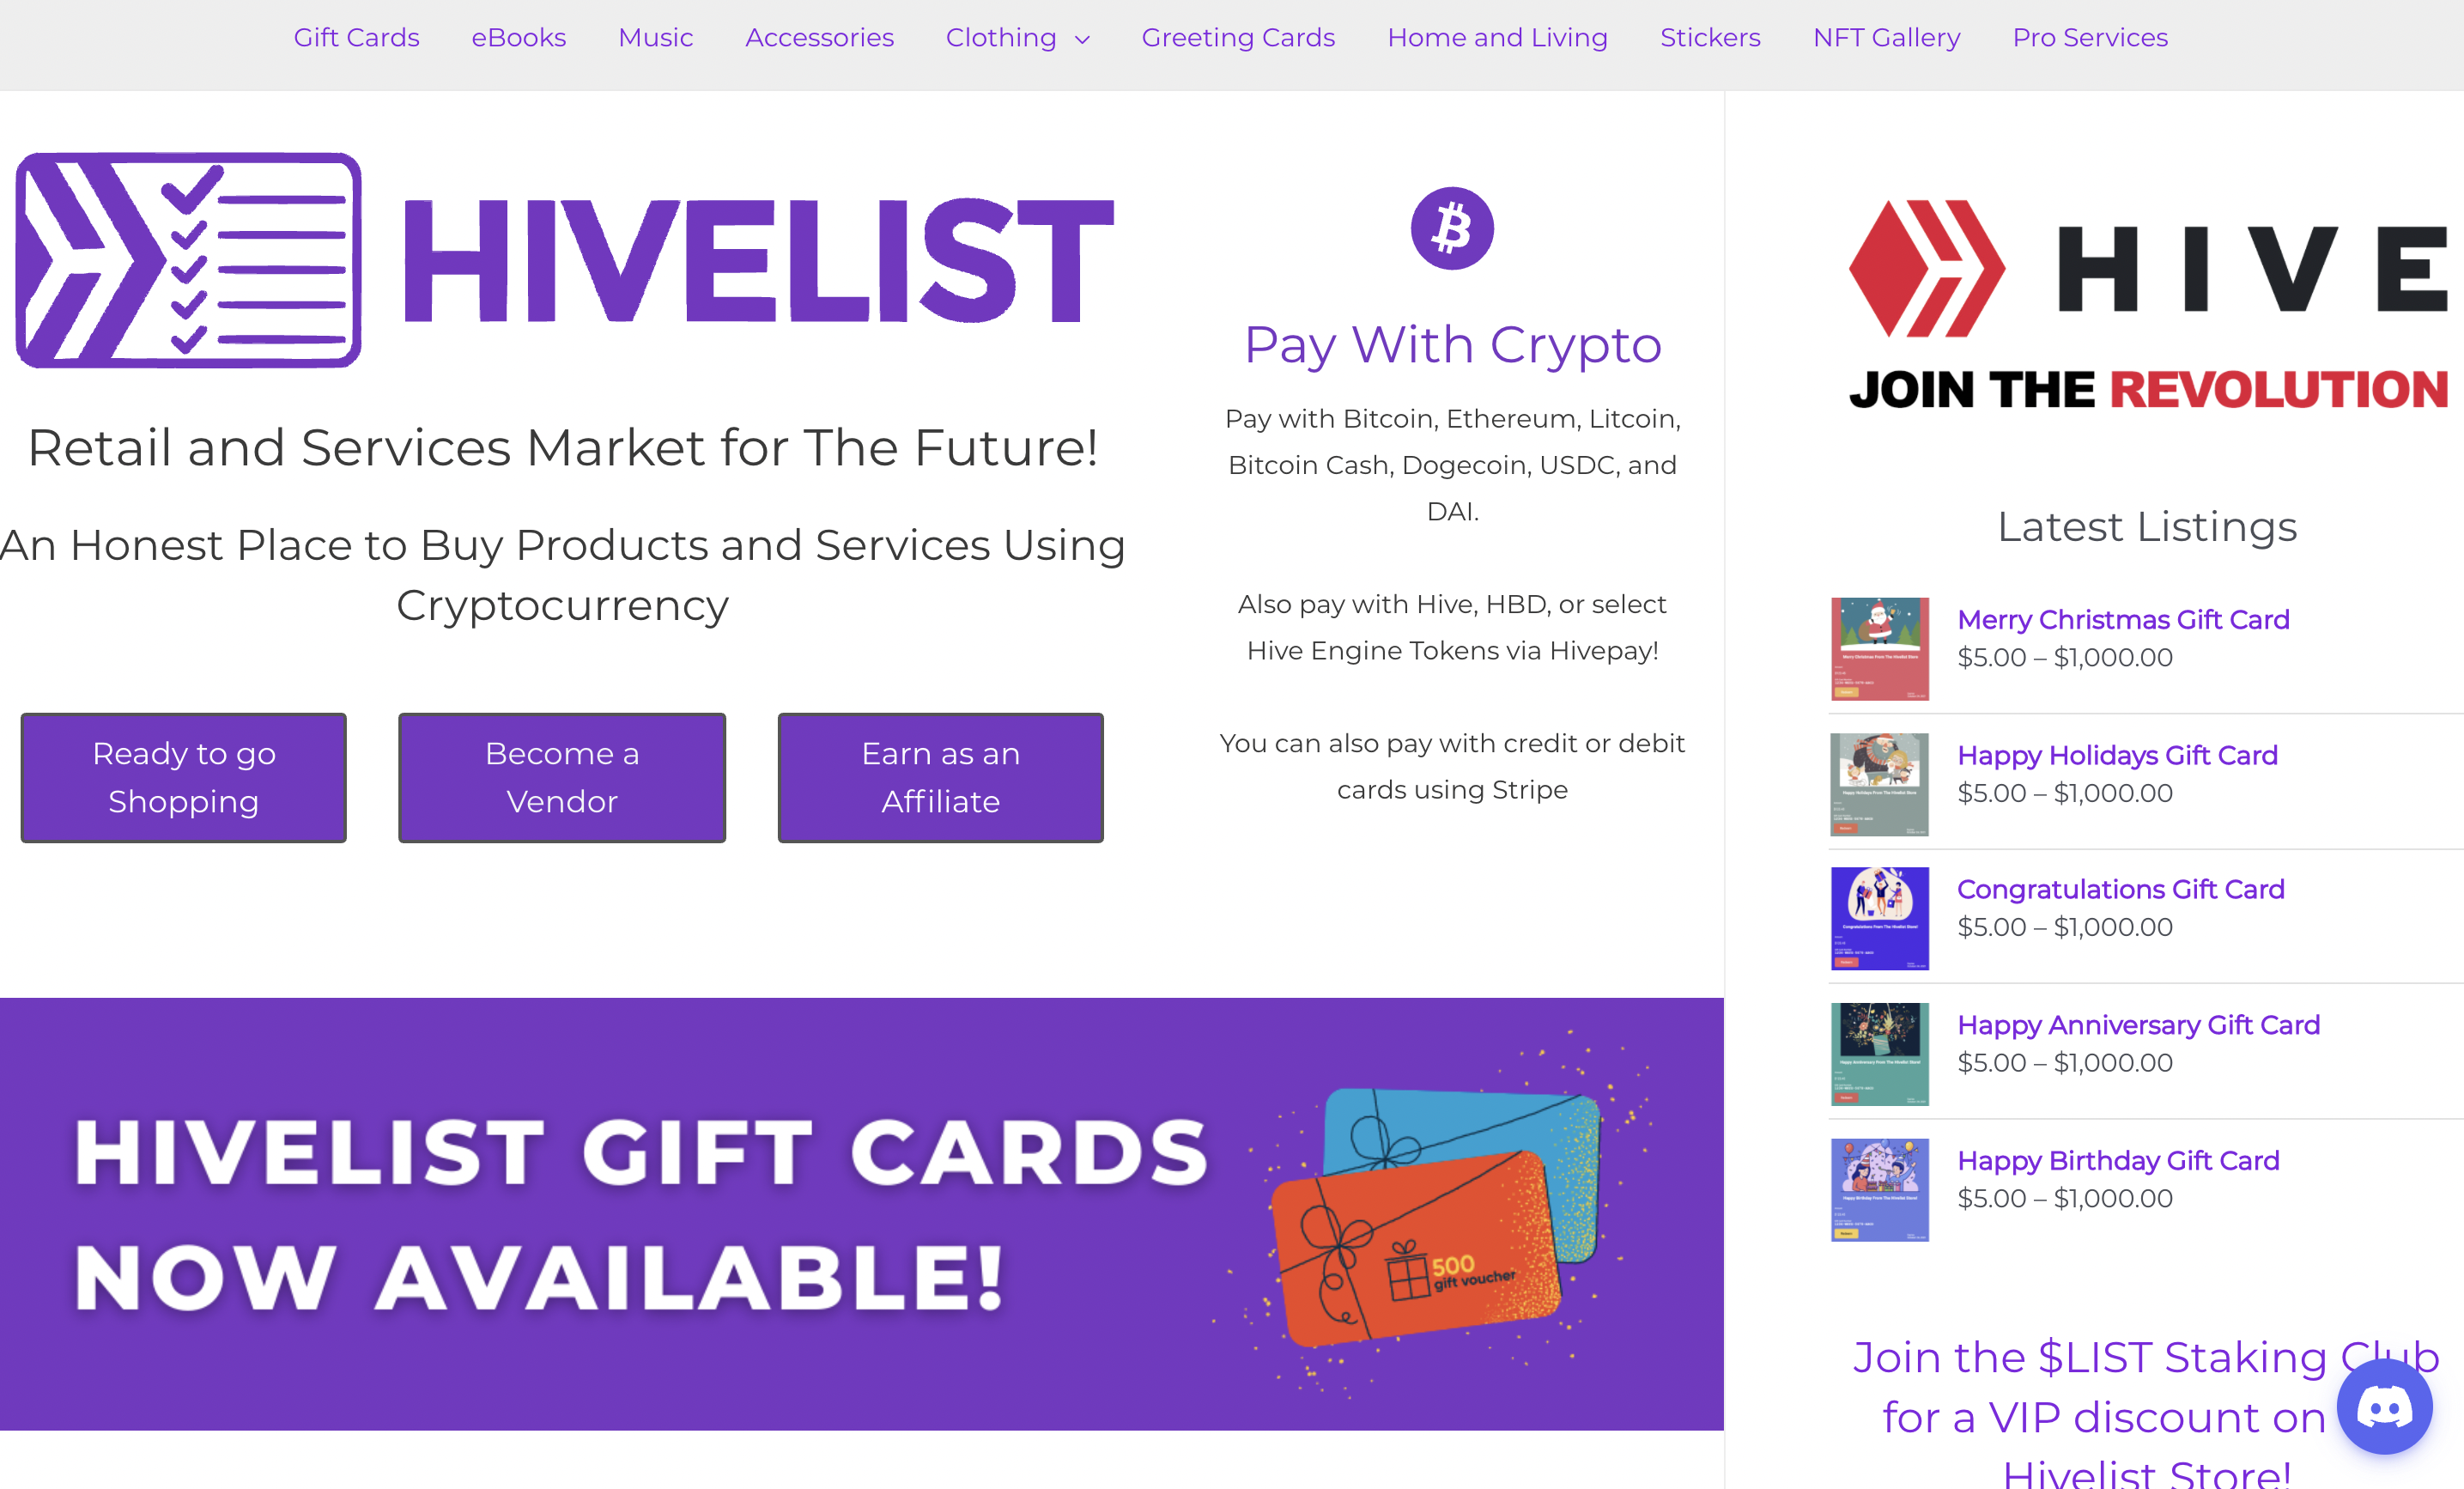 @hivelist/hivelist-store-gift-cards-now-available